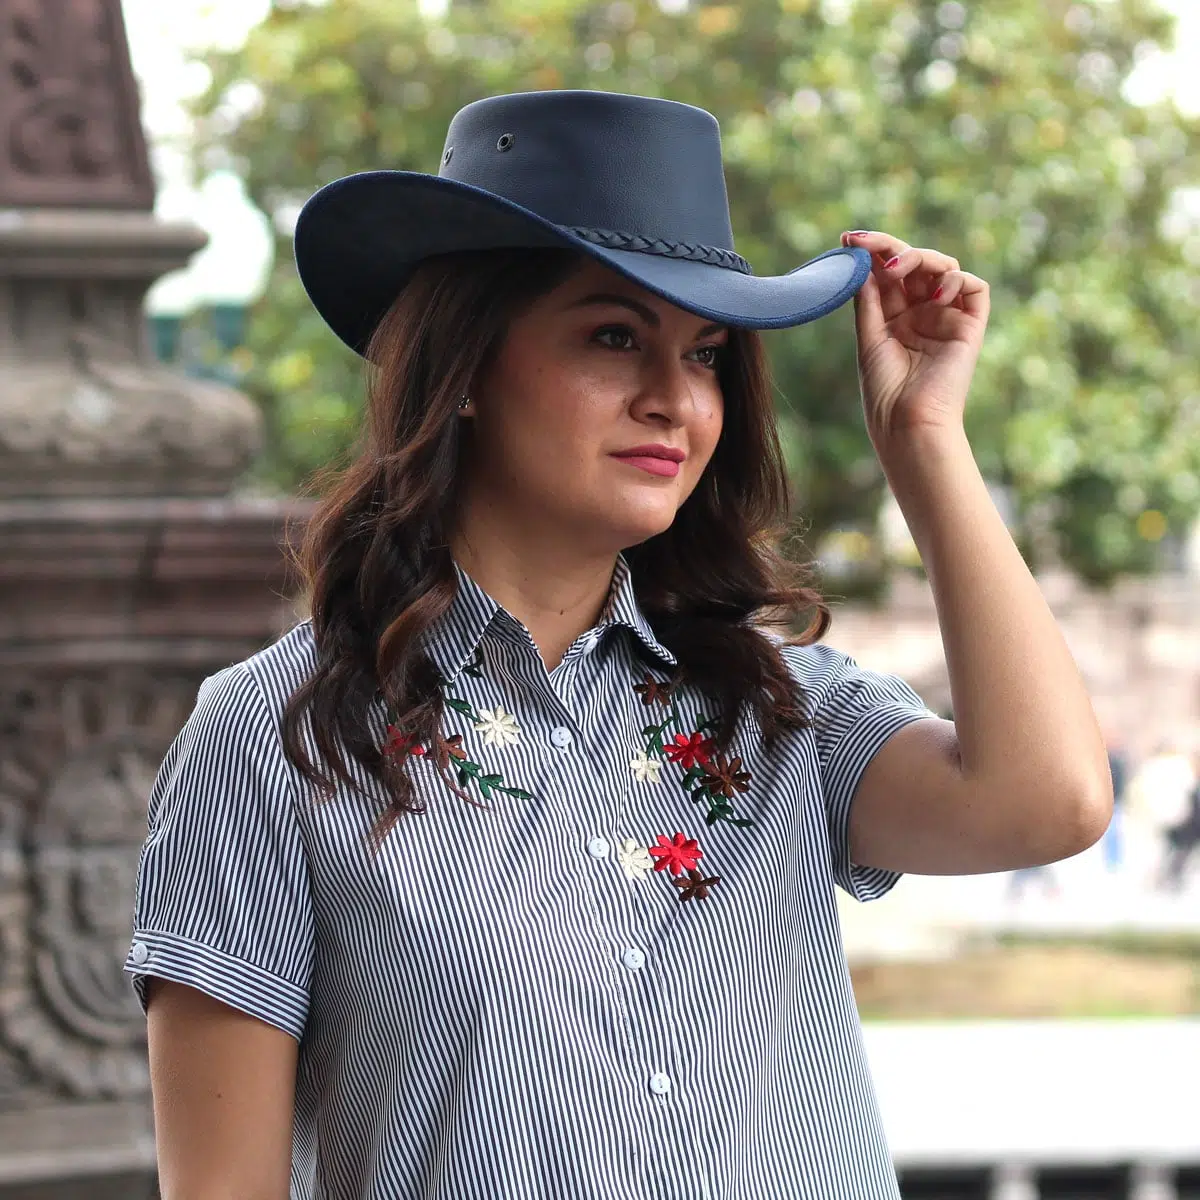 A young lady wearing a leather hat that comes in a variety of colors